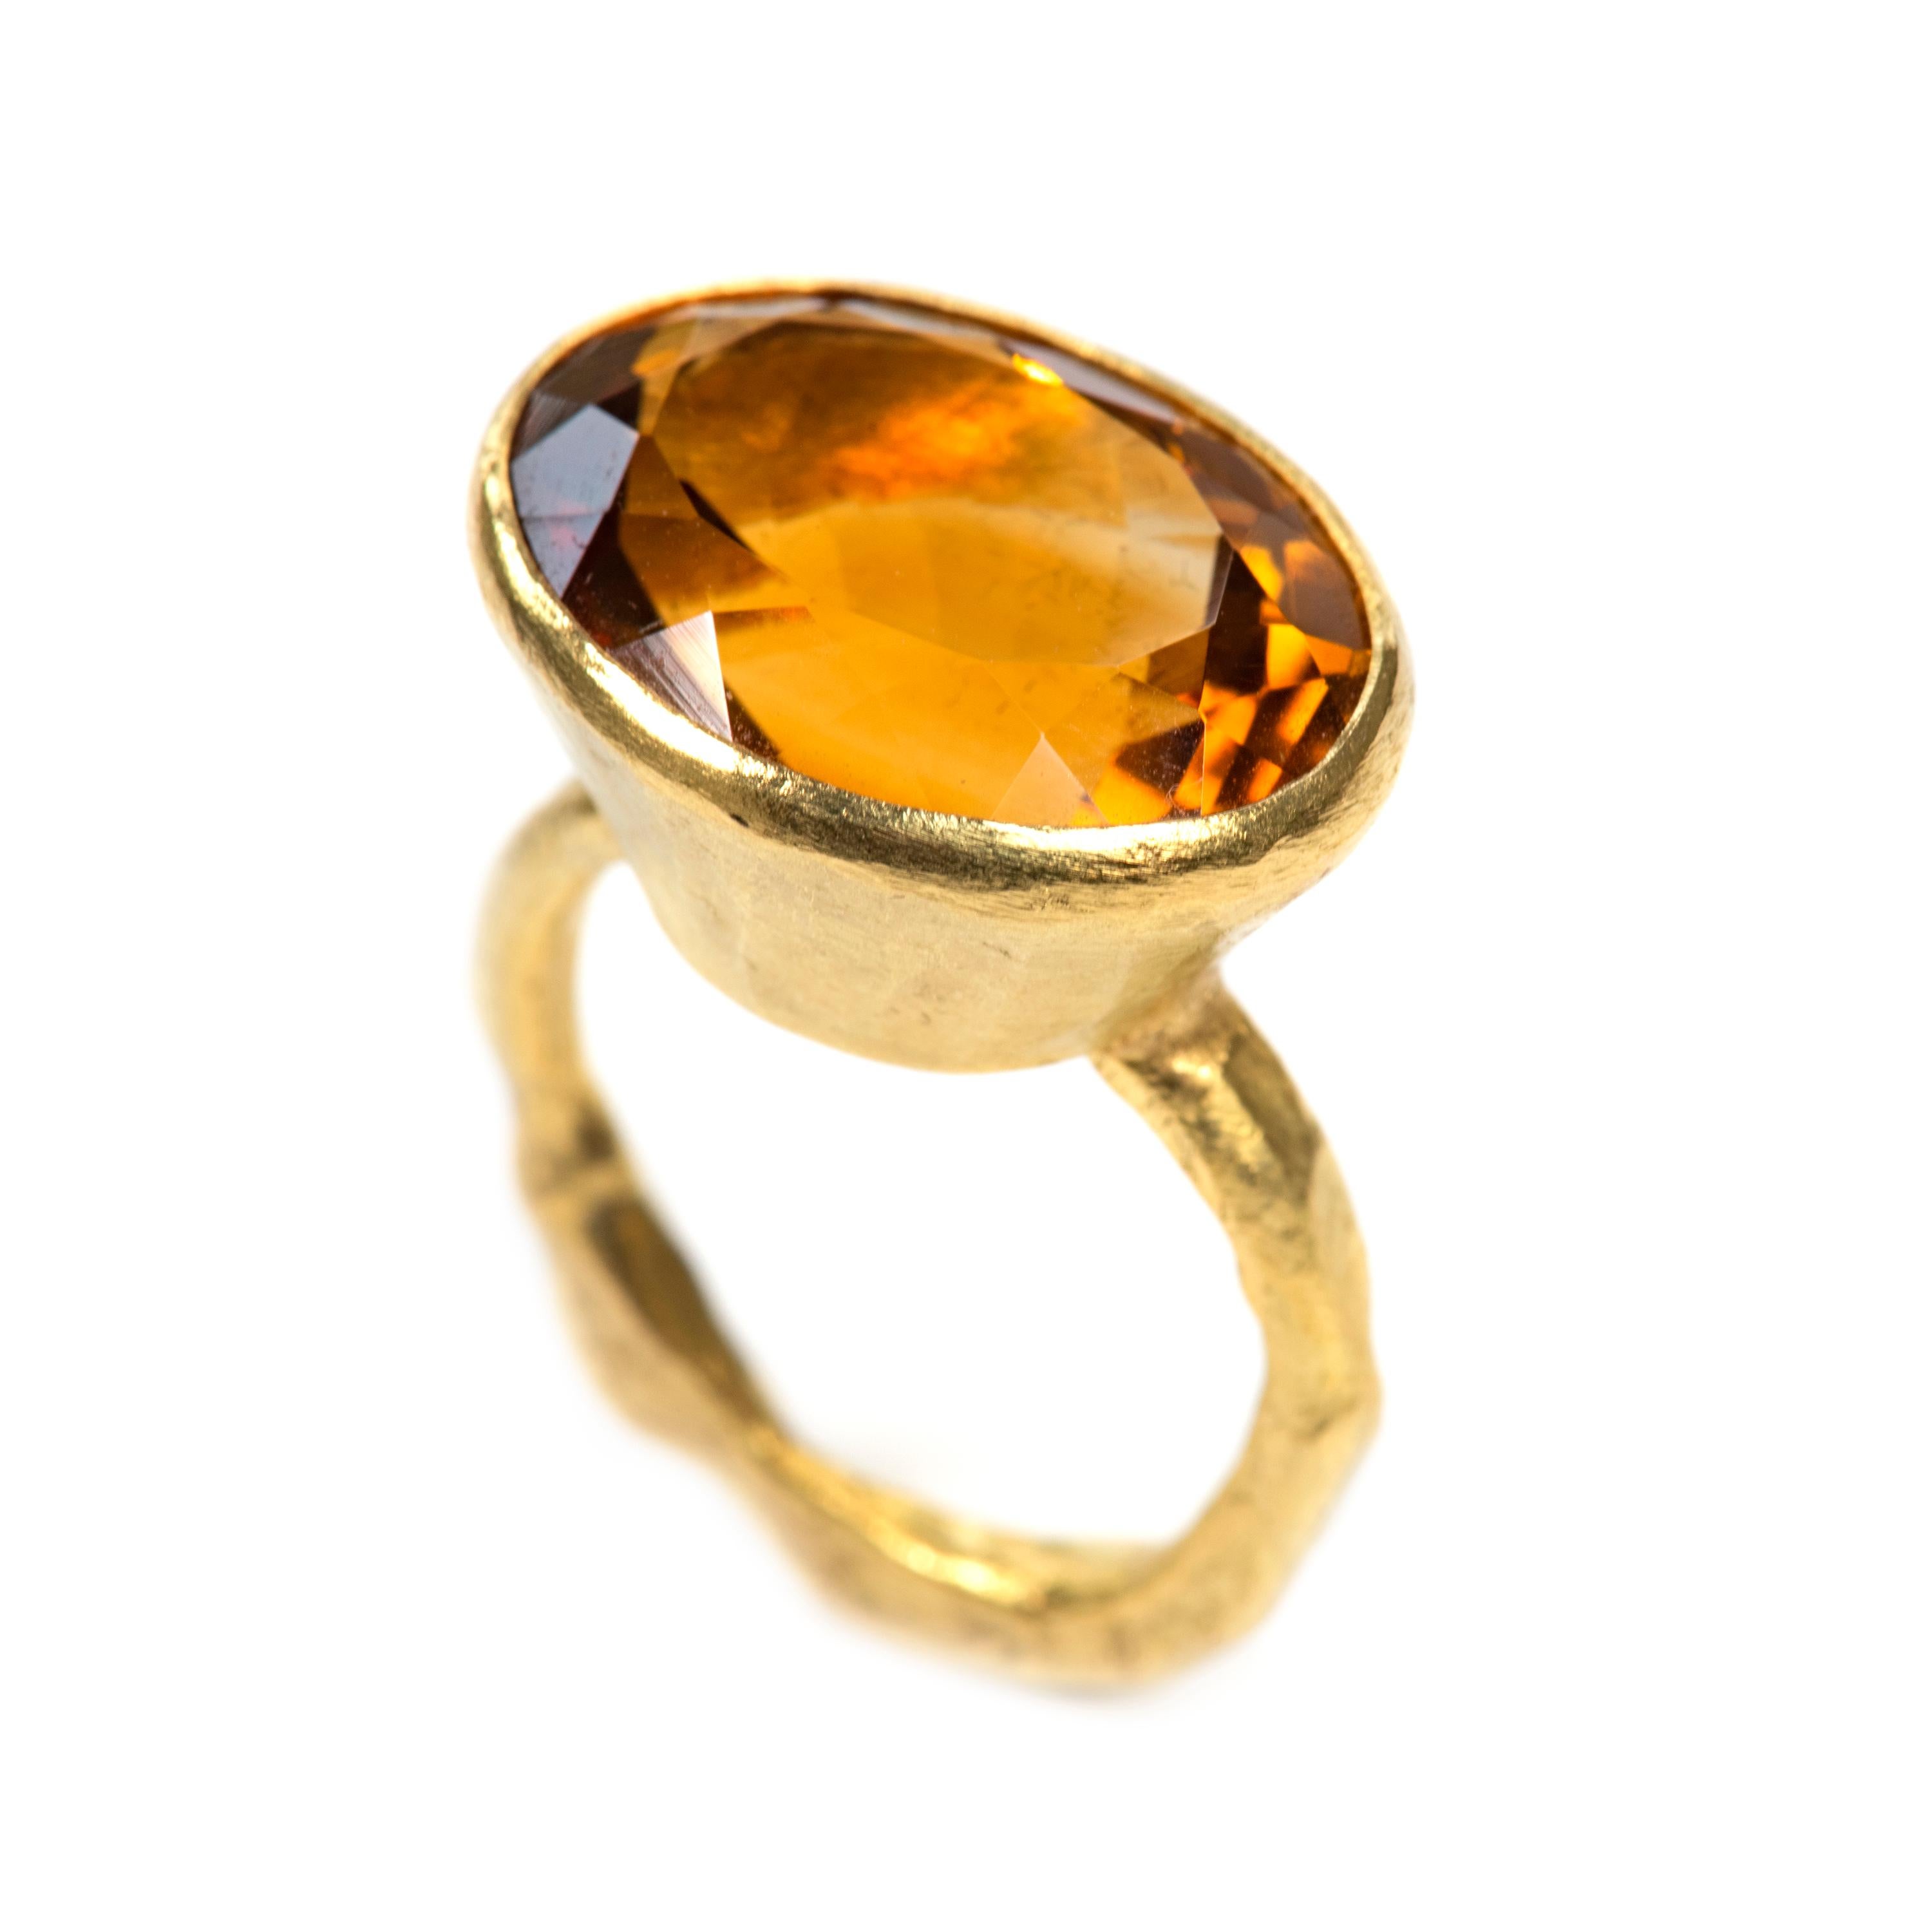 18k gold reticulated ring set with a large oval shaped citrine stone. The band measures 3mm wide, the citrine is approx 19cts and measures 16x21mm with a depth of 11mm. The ring features a tapered rub over setting to enhance and frame the